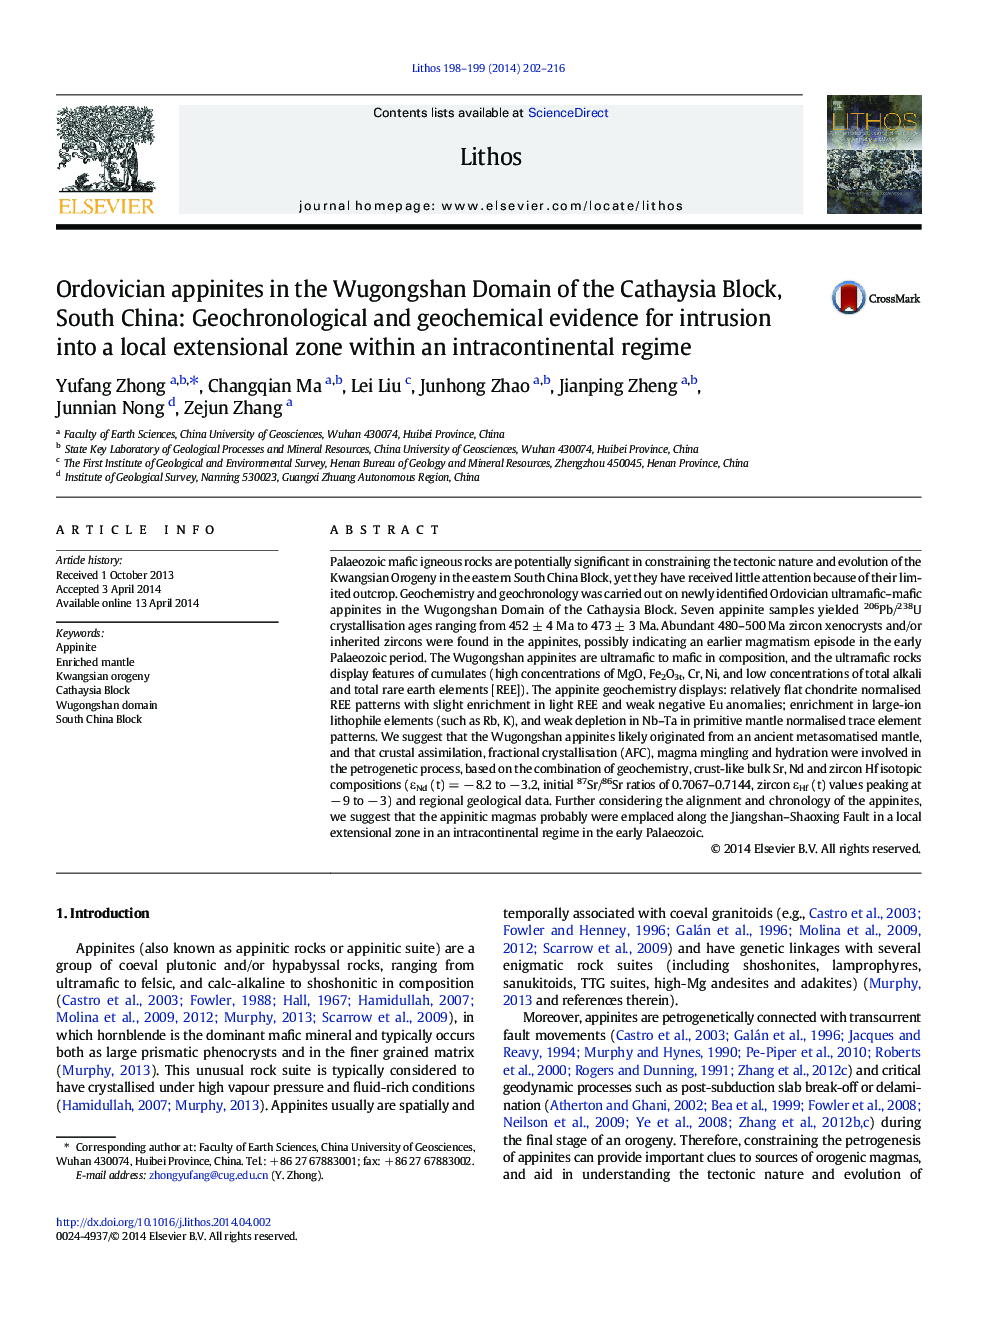 Ordovician appinites in the Wugongshan Domain of the Cathaysia Block, South China: Geochronological and geochemical evidence for intrusion into a local extensional zone within an intracontinental regime